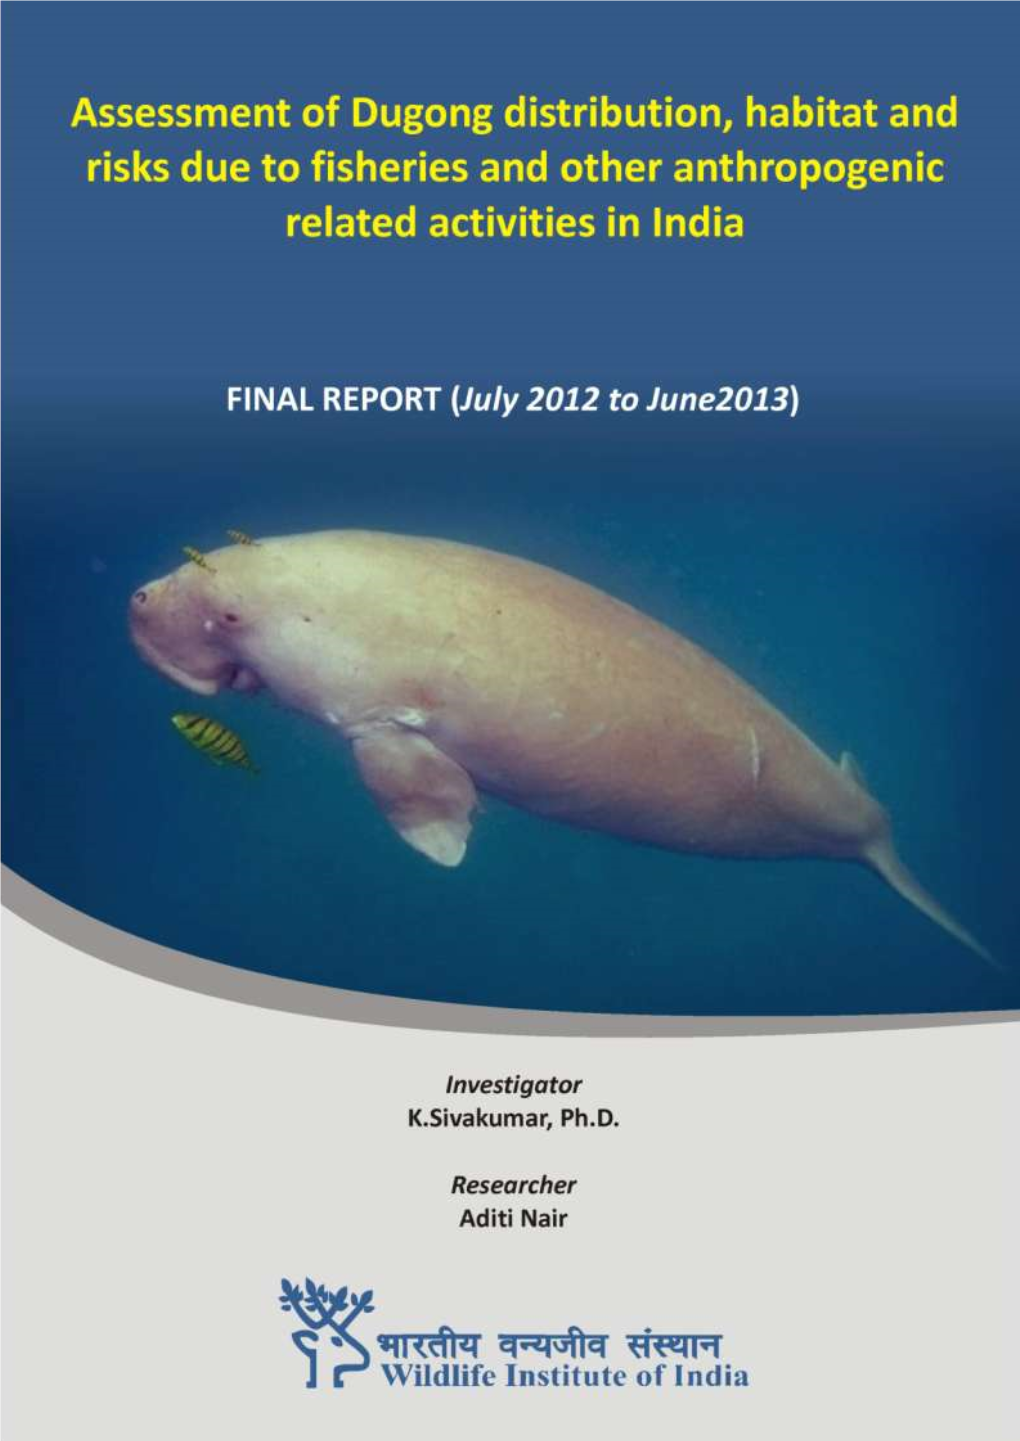 Dugong Distribution, Habitat and Risks Due to Fisheries and Other Anthropogenic Activities in India